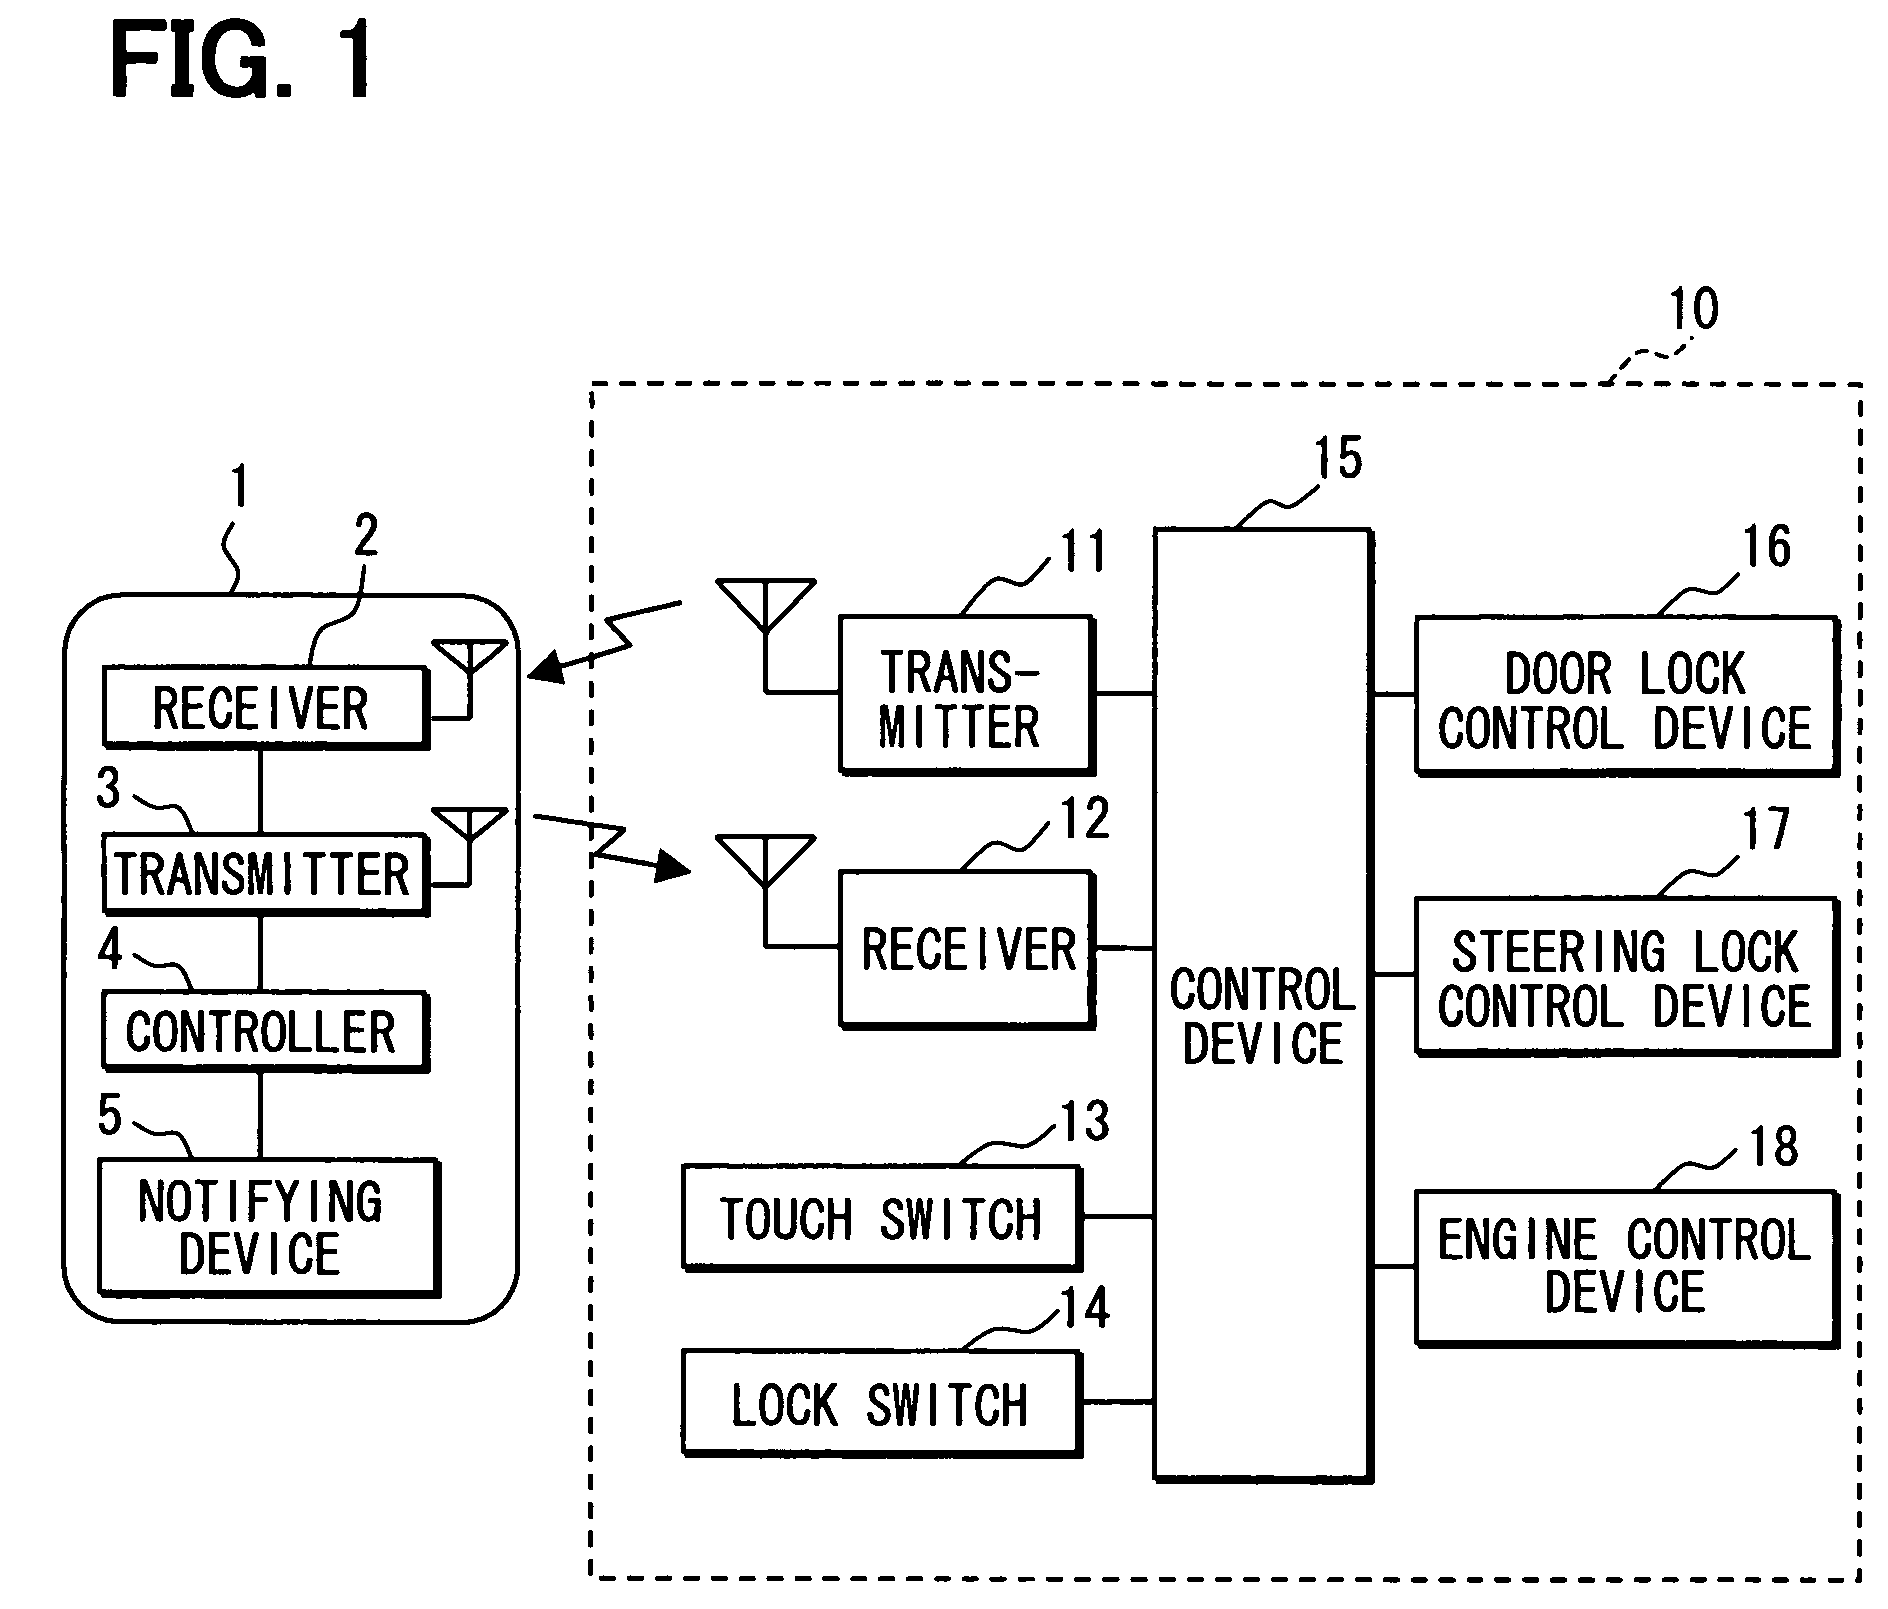 Vehicle location information notifying system